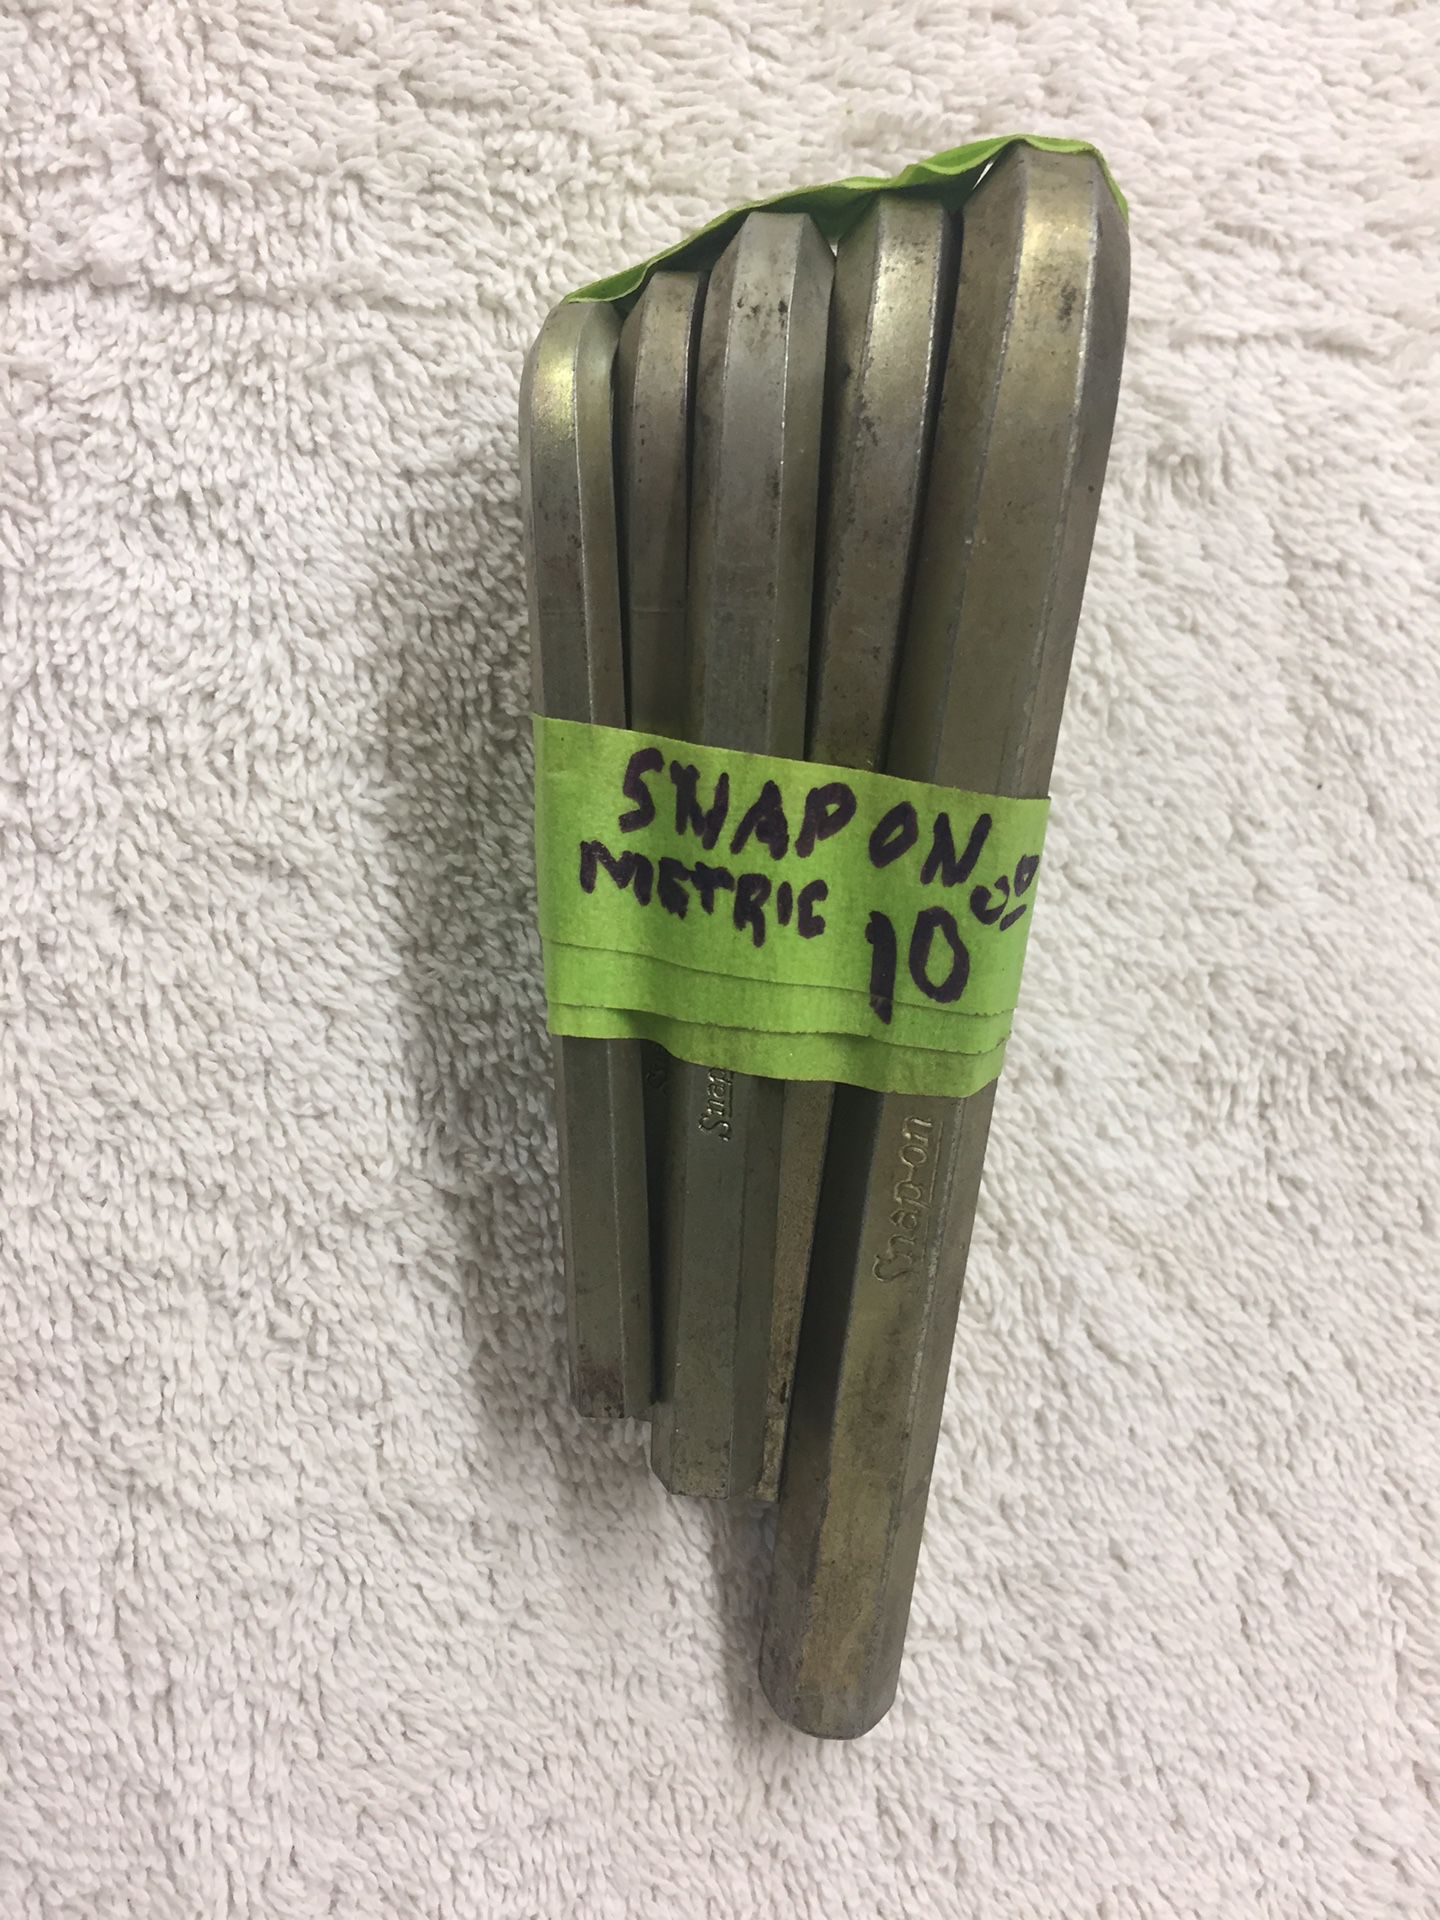 Snap-On Metric Allen Wrenches